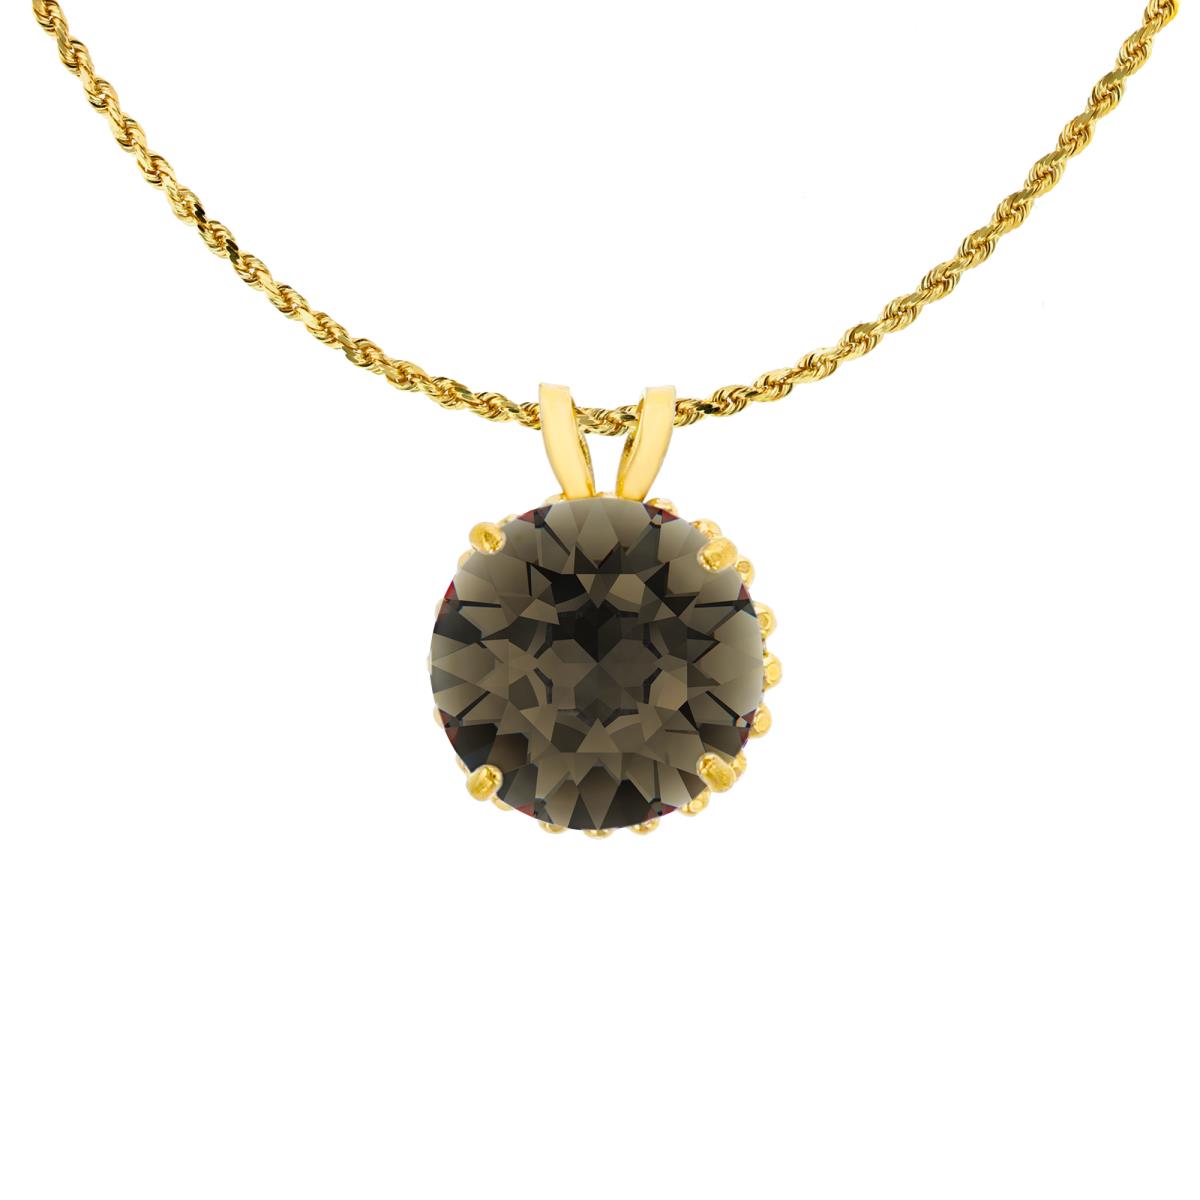 14K Yellow Gold 7mm Rd Cut Smokey Quartz with Bead Frame Rabbit Ear 18" Rope Chain Necklace